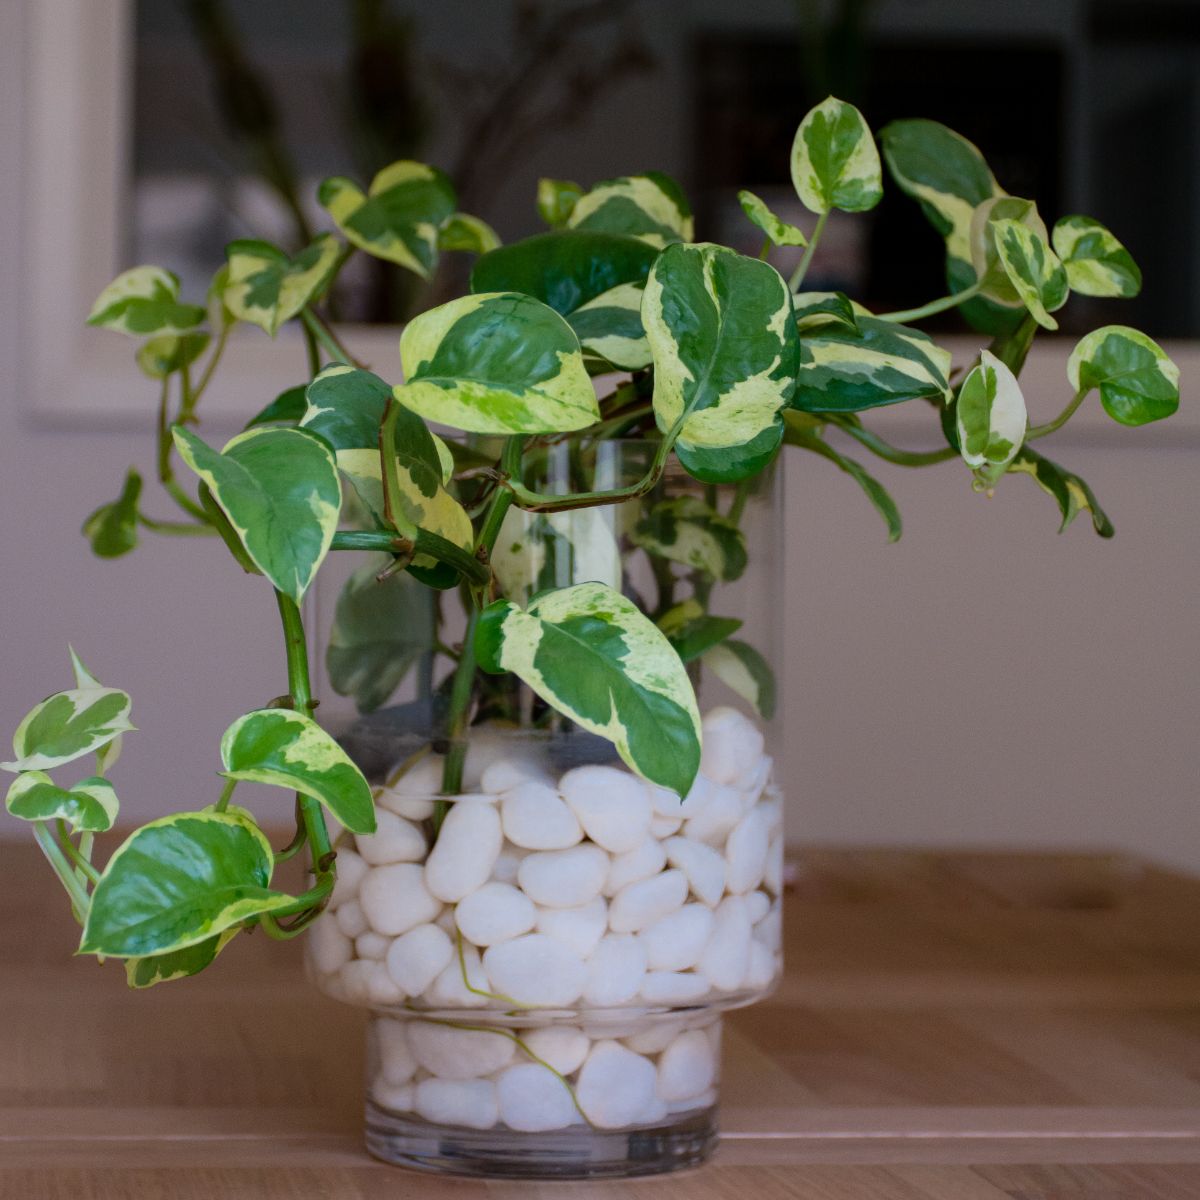 A Glacier Pothos in a glass pot on a table.